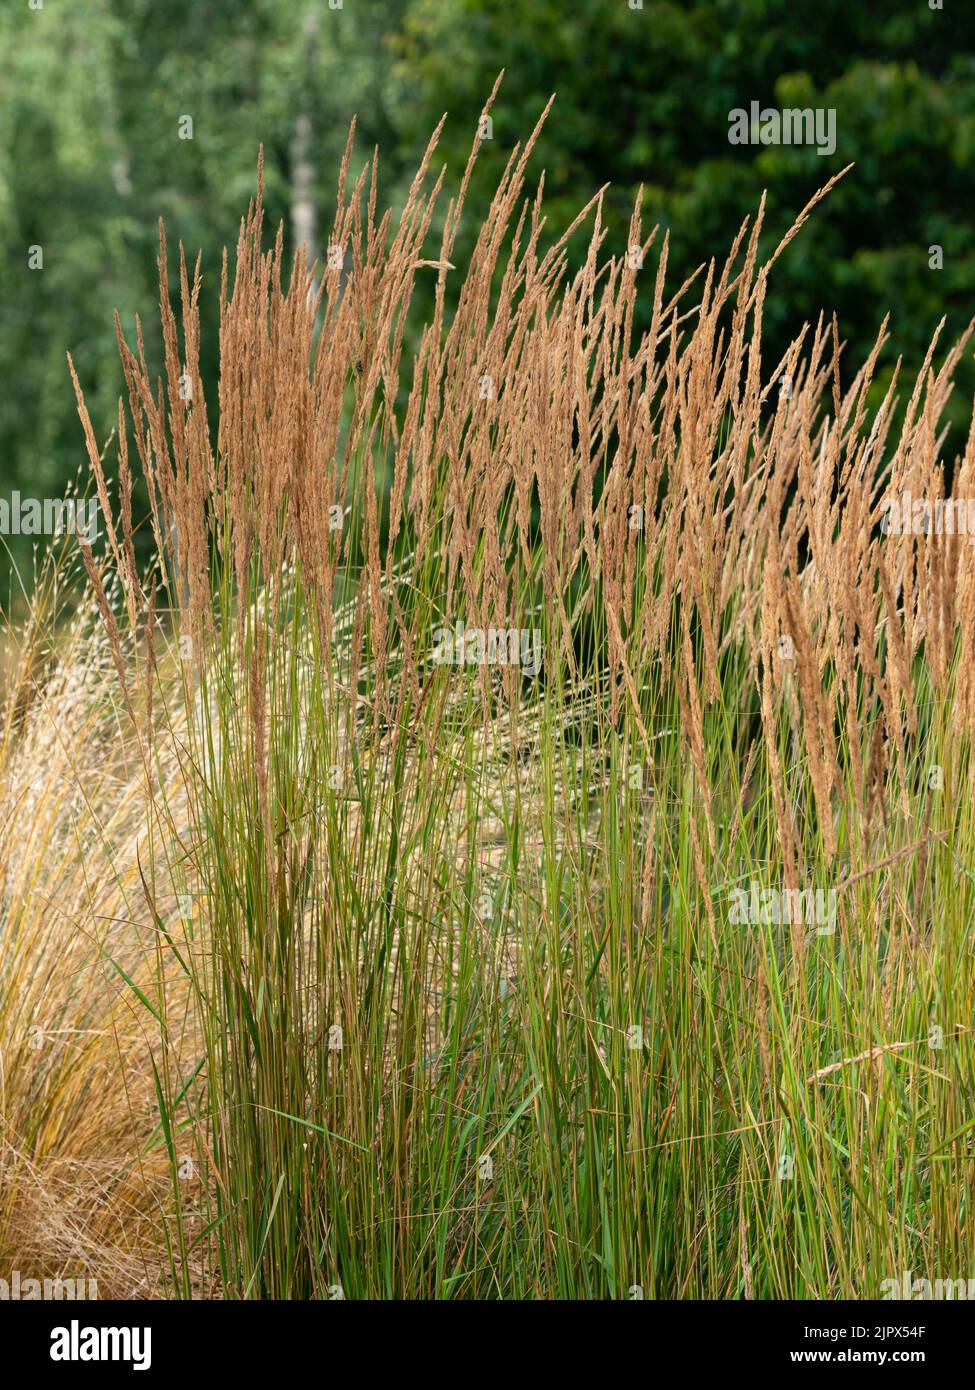 Brown, upright flowering panicles of the hardy reed feather grass, Calamagrostis x acutiflora 'Karl Foerster' Stock Photo